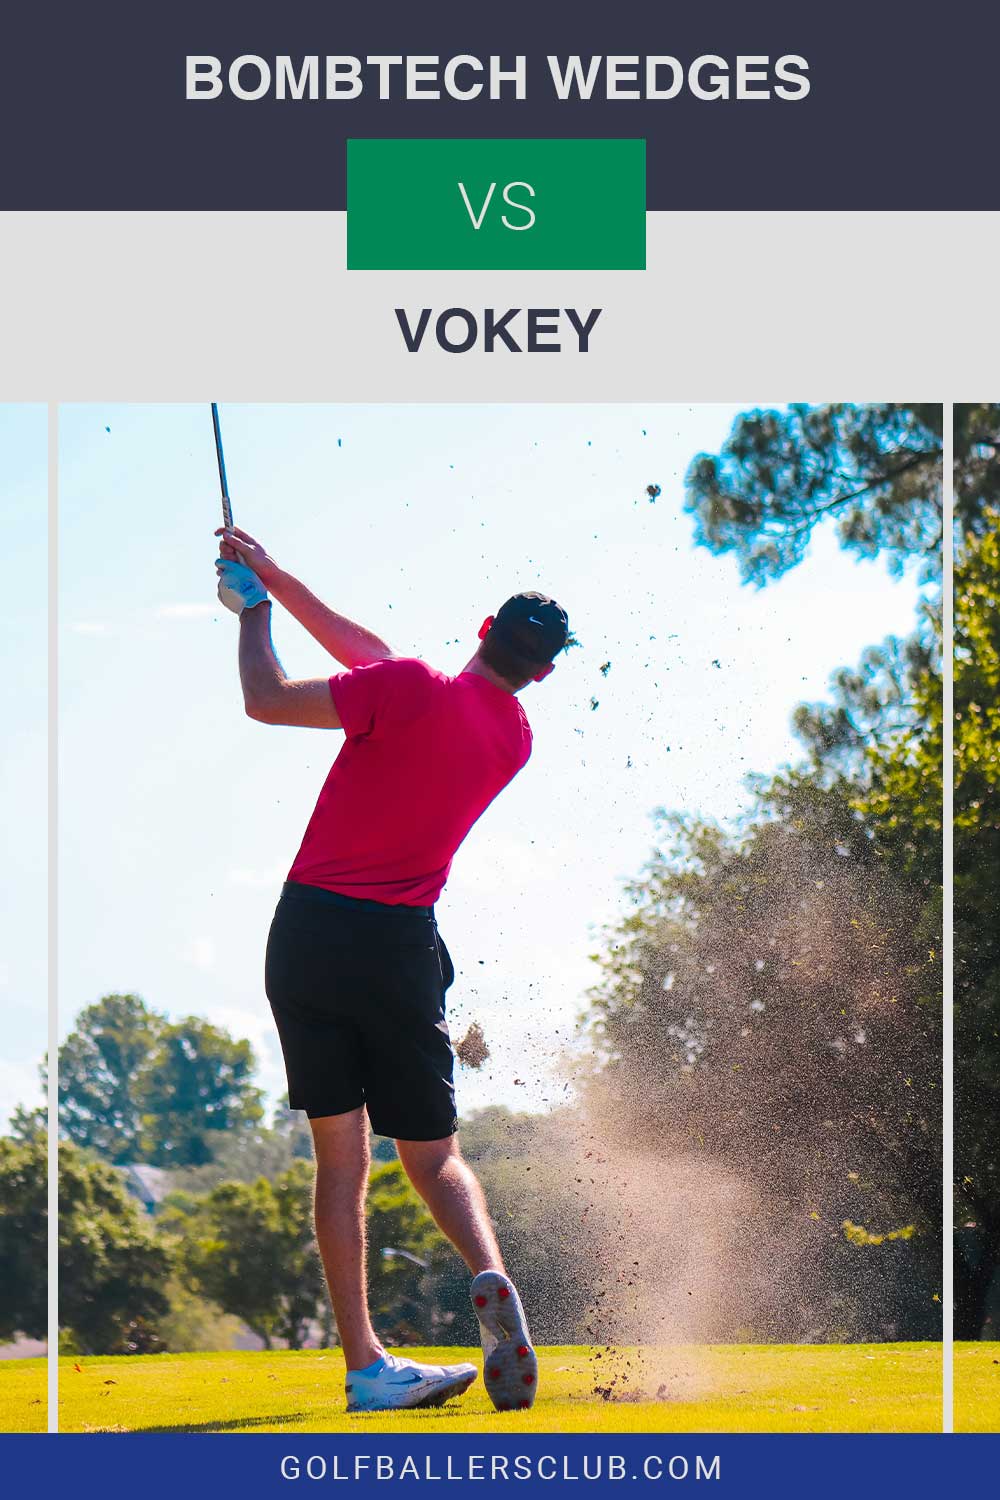 Man wearing red t shirt and black shorts is taking shot in a green golf course - Bombtech Wedges vs. Vokey.